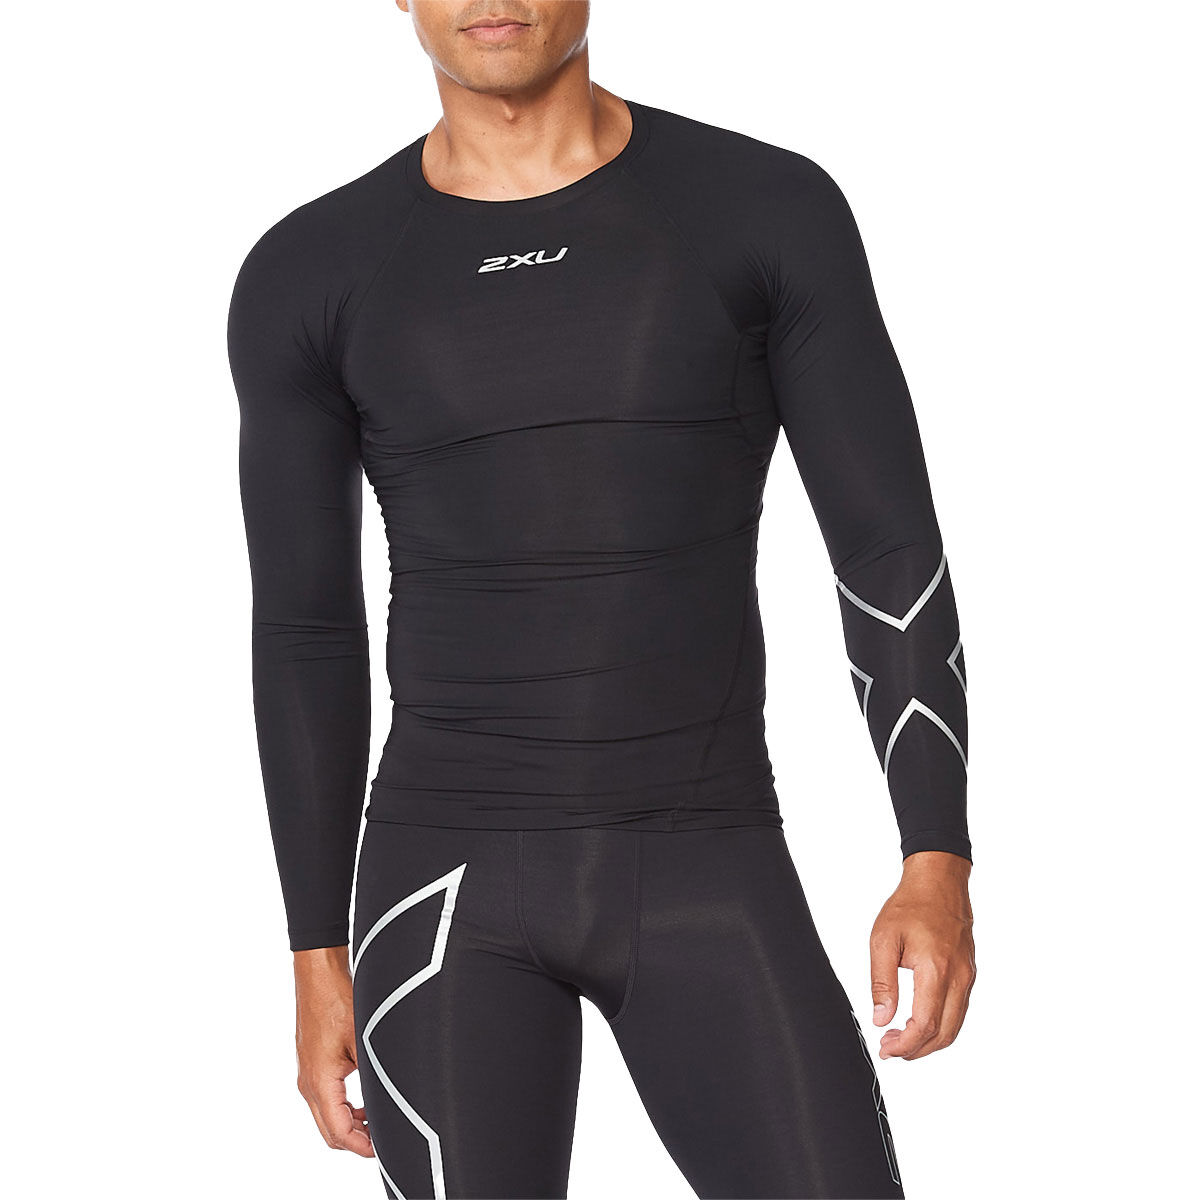 Rebel Sport NZ - The SKINS SERIES-1 medium compression, long-sleeve top is  engineered to maximise your output. Simple but packs a punch, giving you  the edge when you need it most. Shop